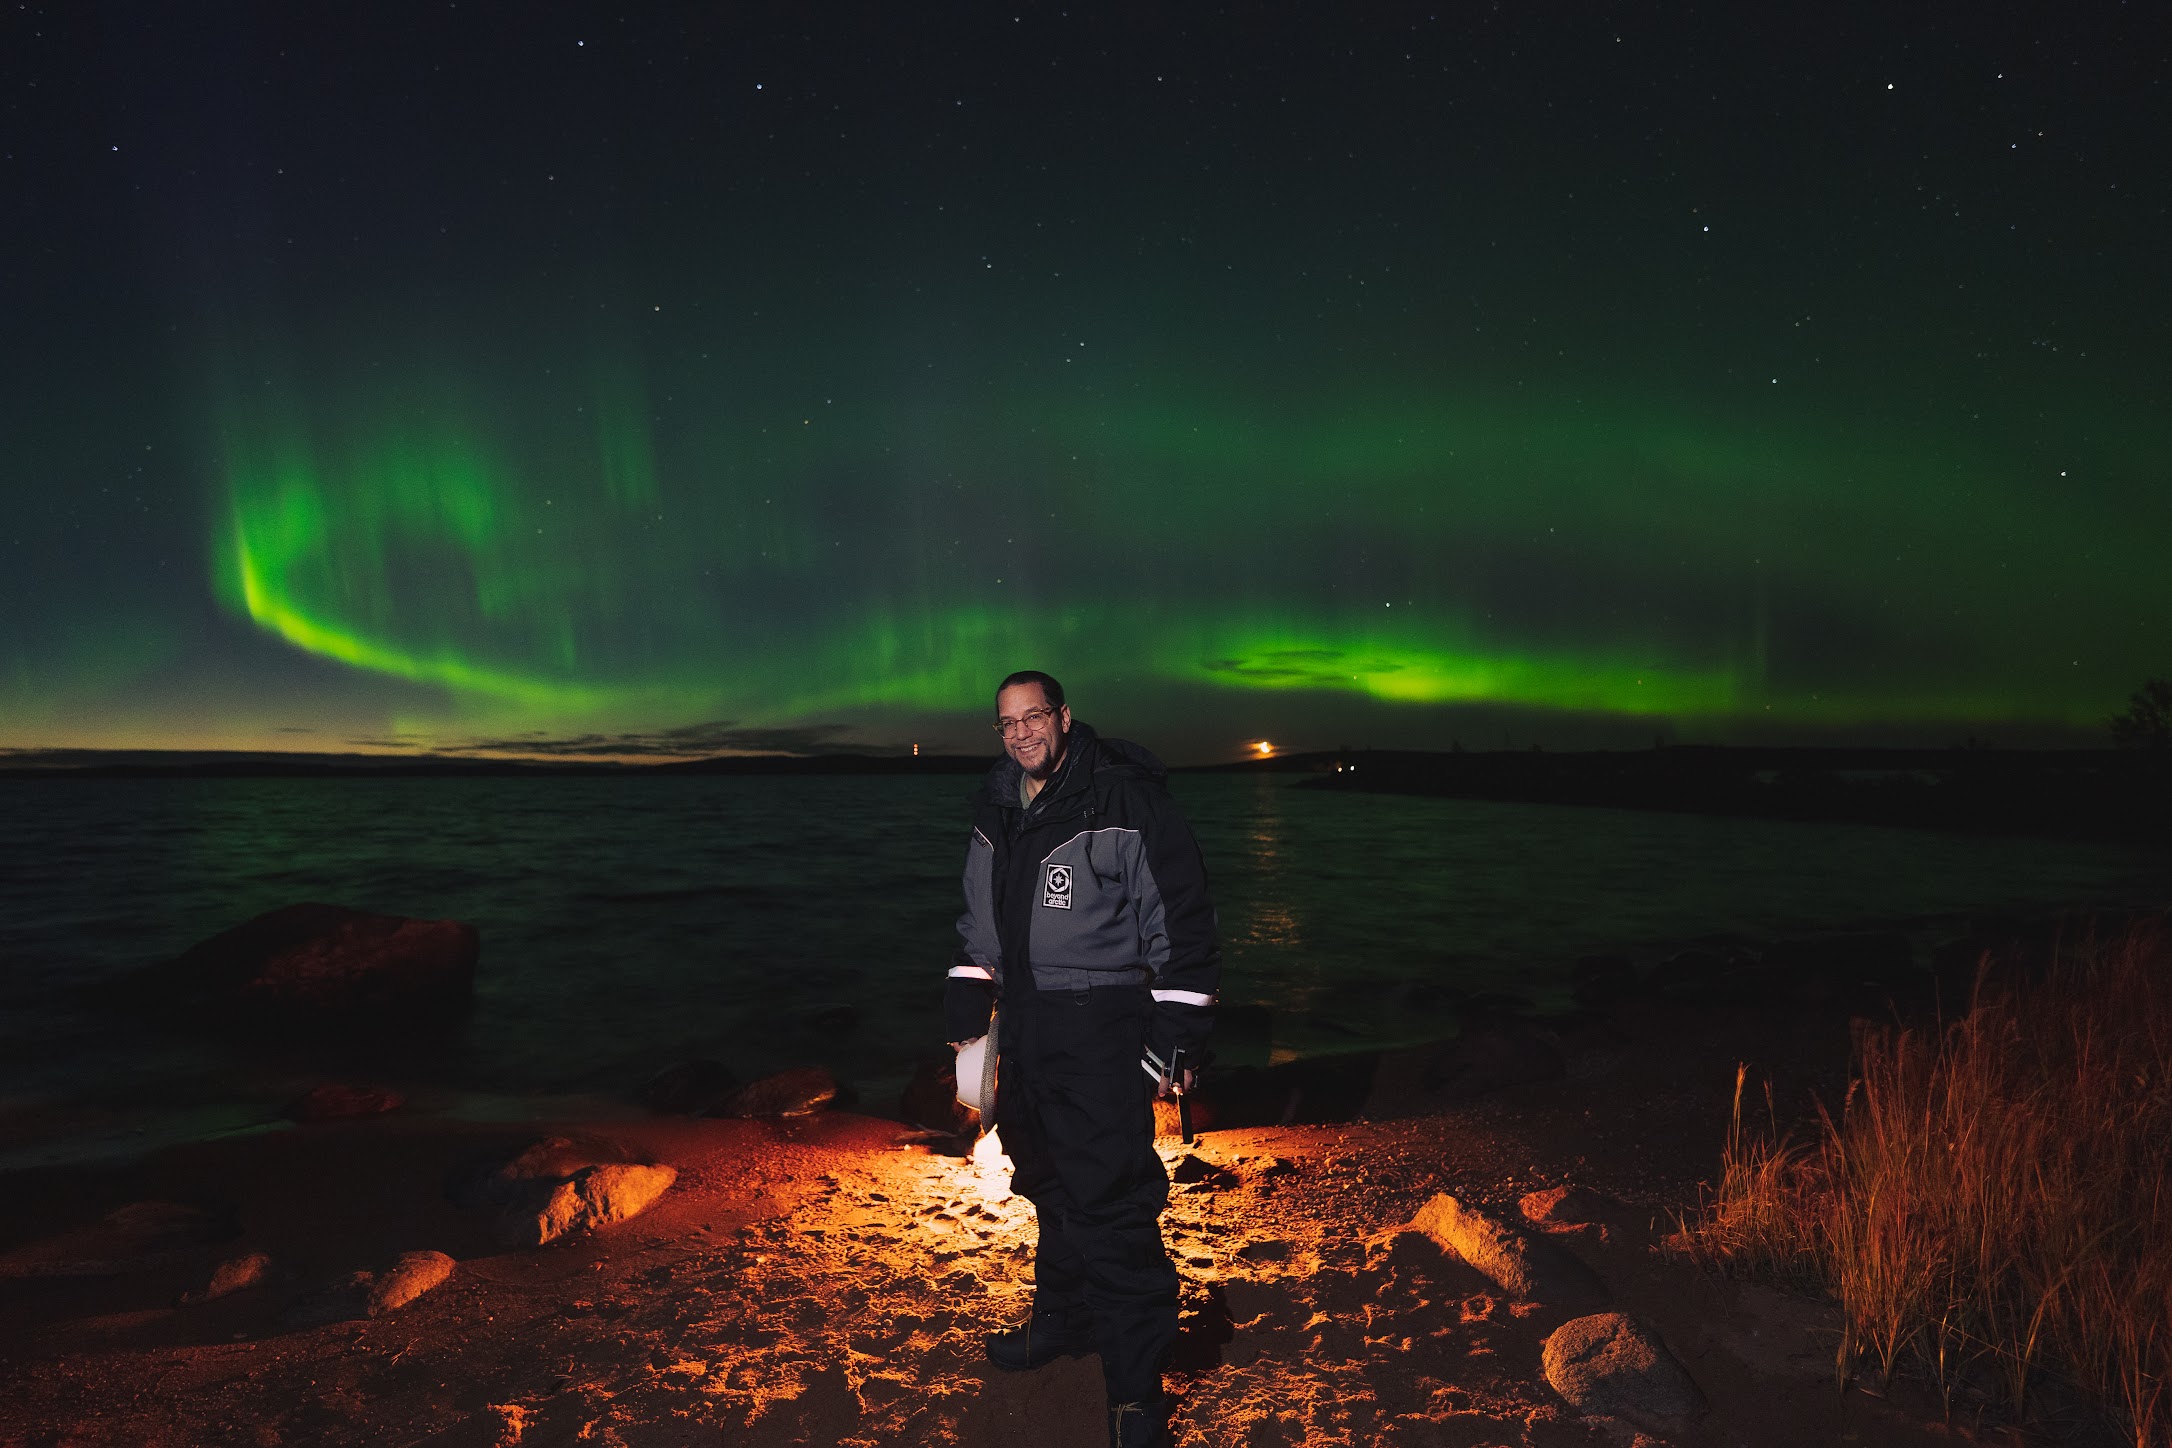 a man standing on a beach with a green aurora borealis in the background